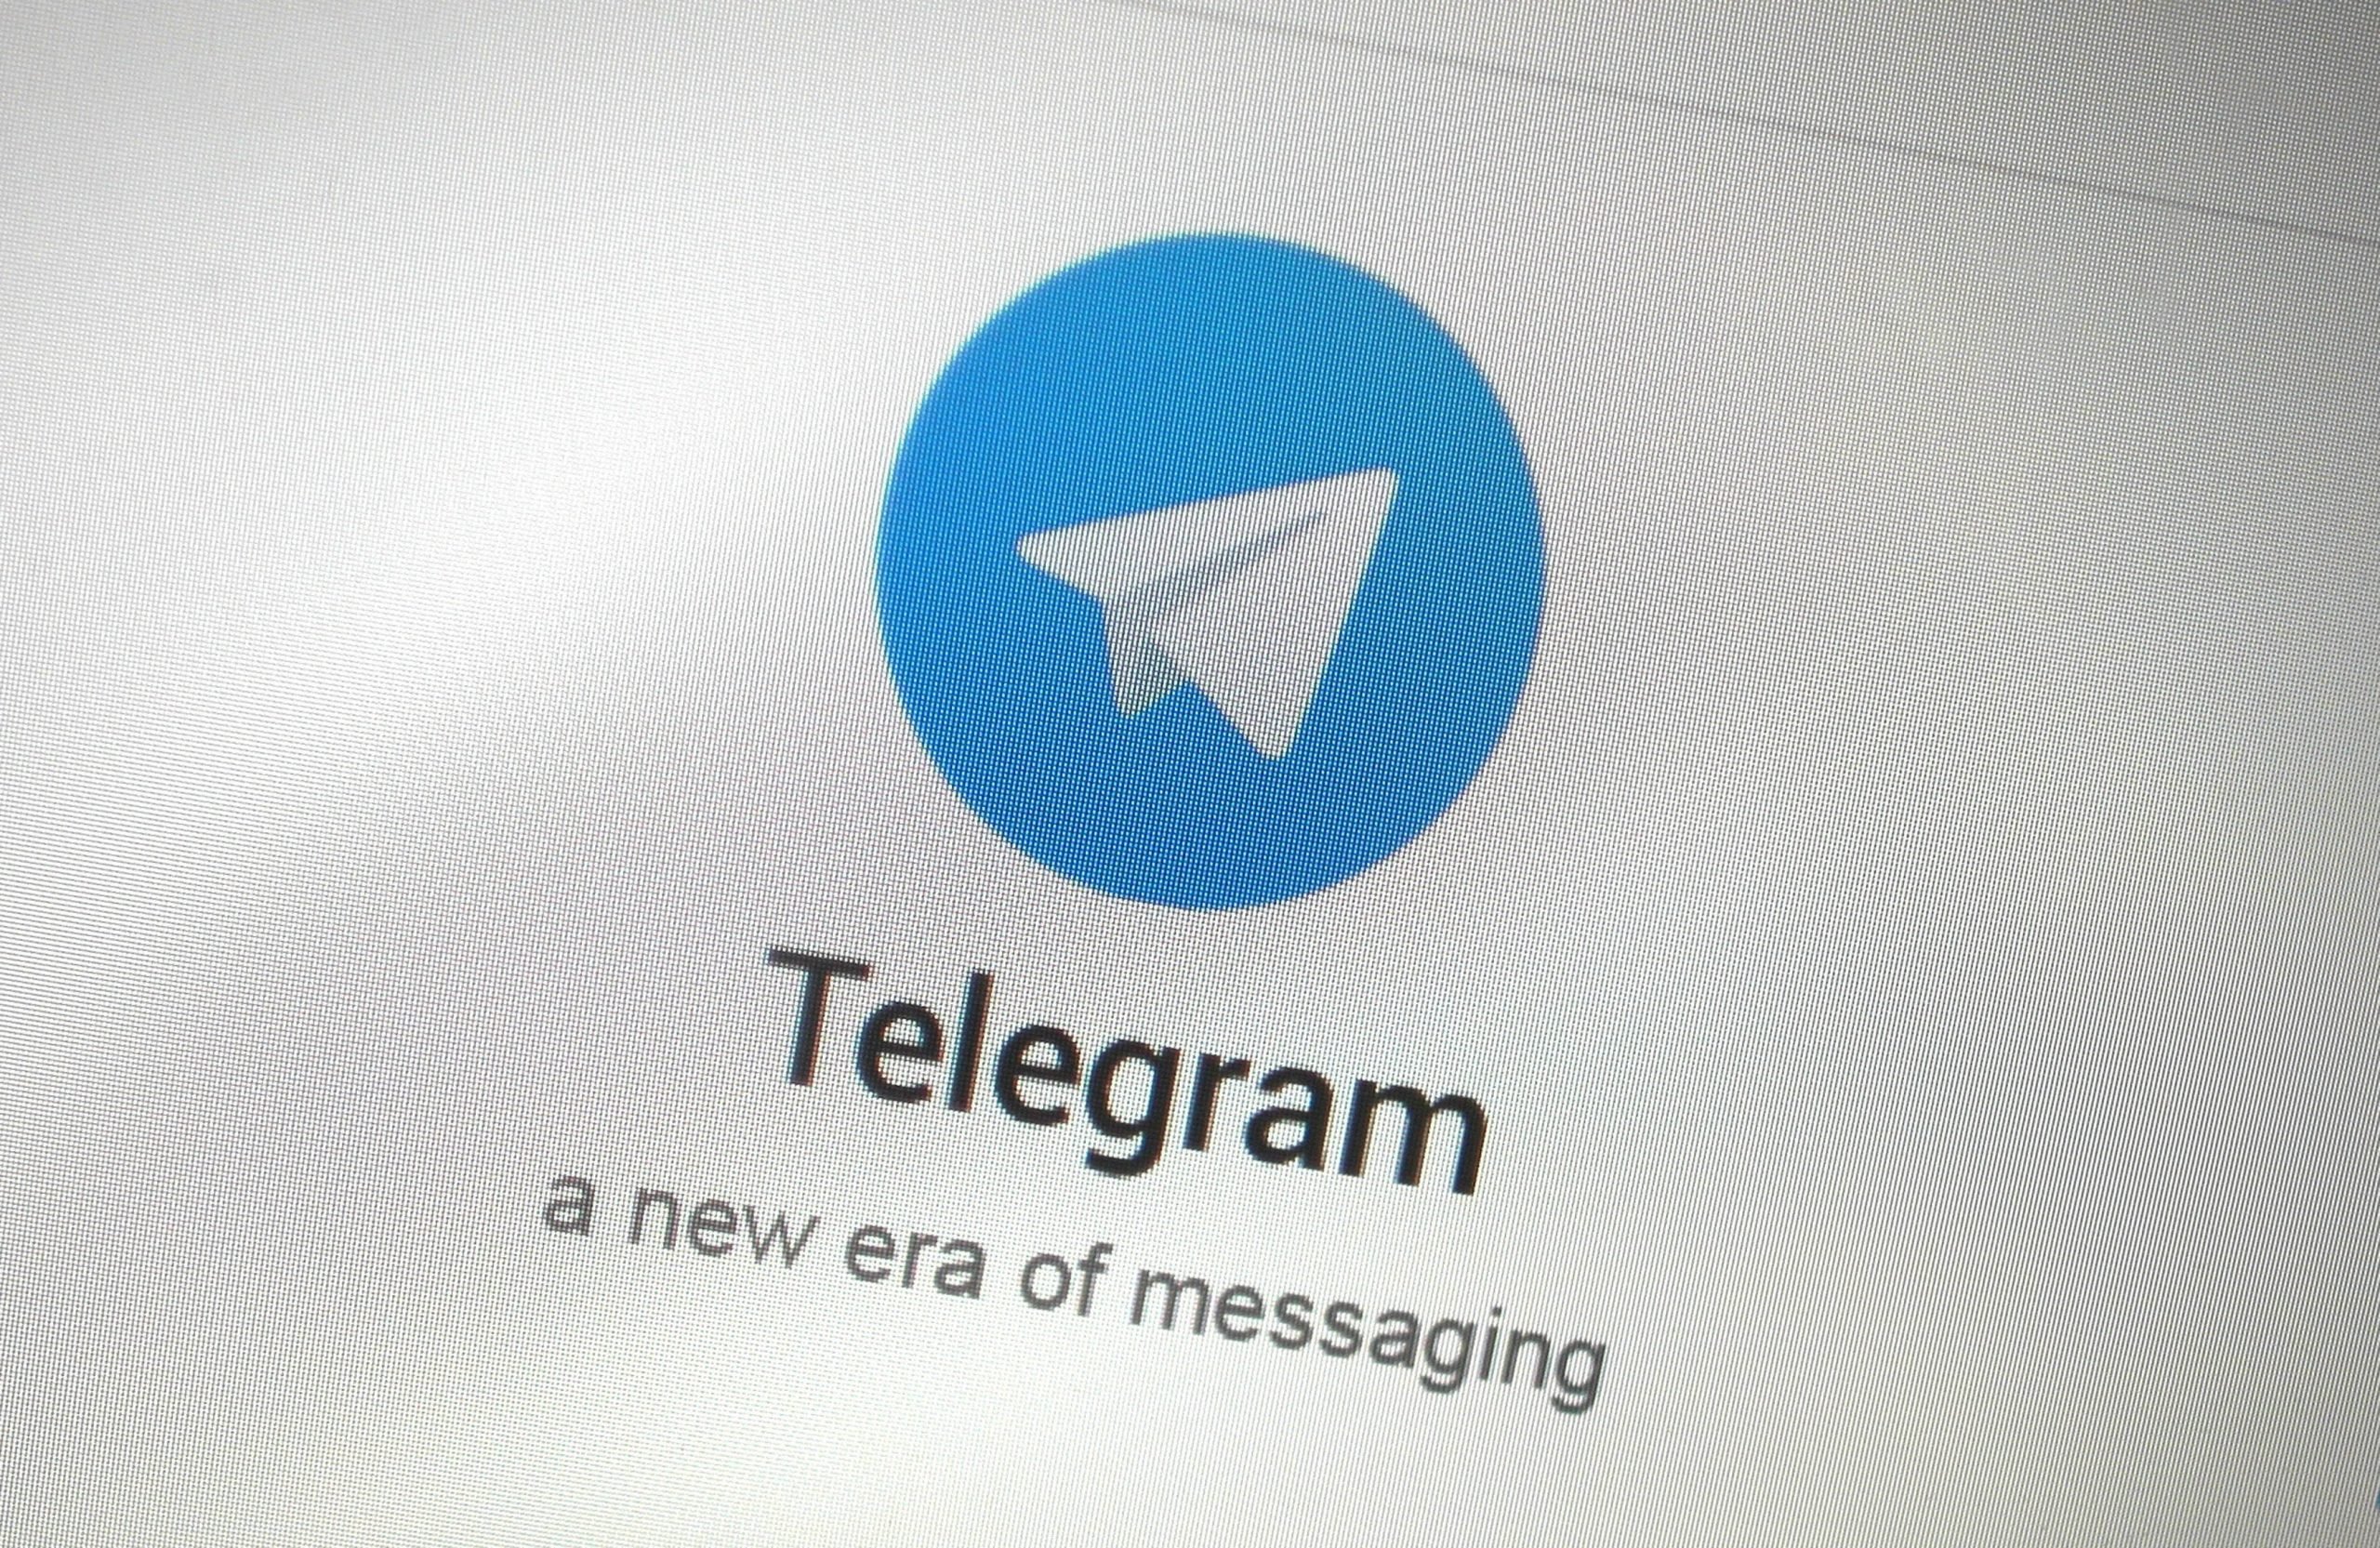 FILE PHOTO: The Telegram messaging app logo is seen on a website in Singapore November 19, 2015.   REUTERS/Thomas White/File Photo